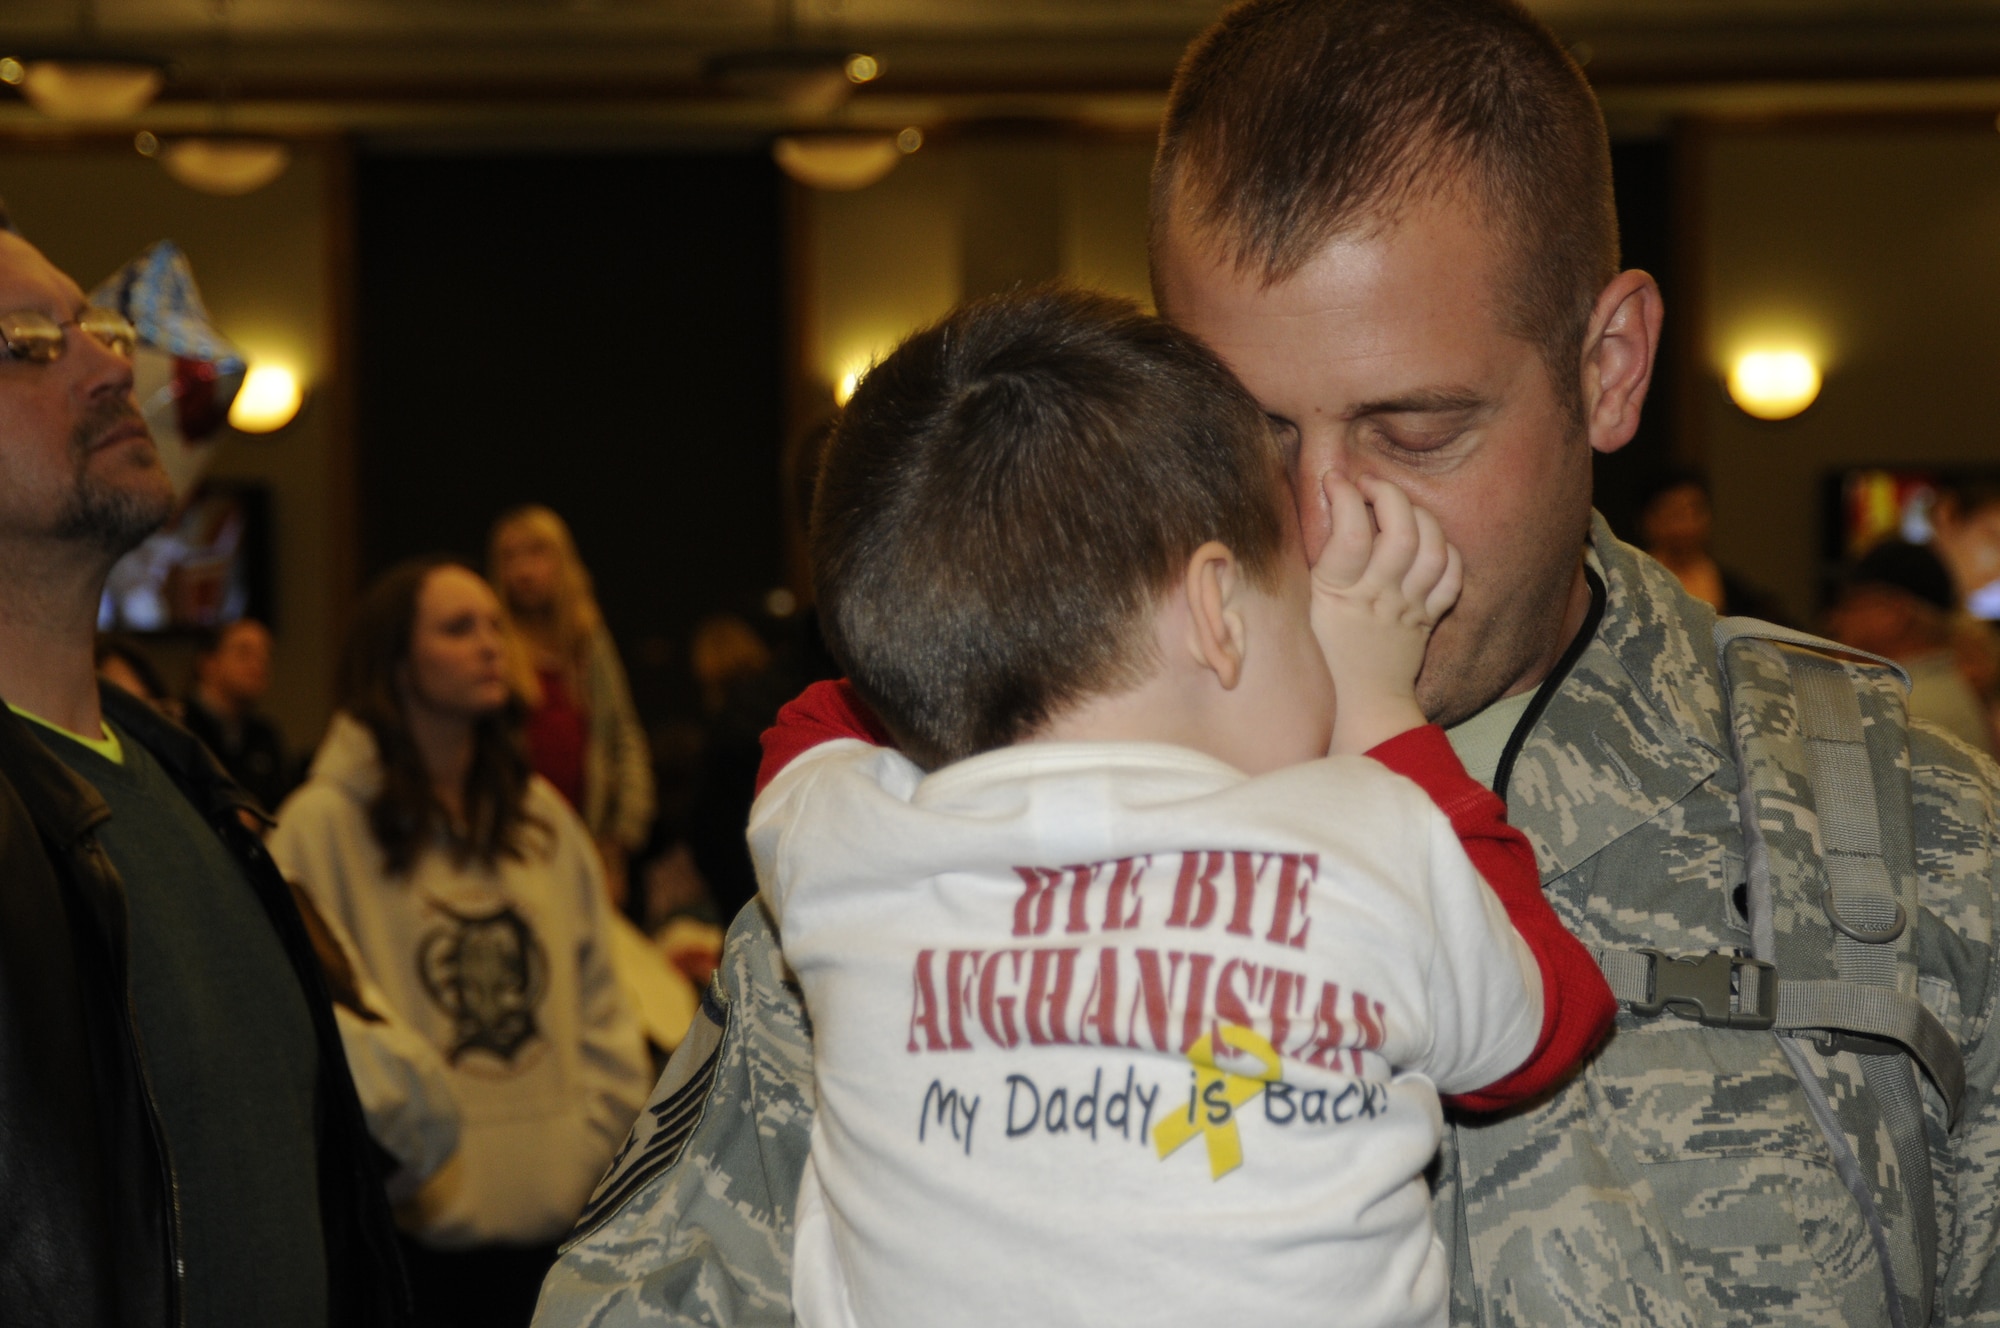 PHOTO OF THE YEAR: Master Sgt. Brian Goodhue is hugged by his son in this Jan. 9, 2012, photo from the homecoming ceremony for approximately 300 Michigan Air National Guard Airmen after a deployment to Afghanistan. The Airmen were flying and supporting the A-10 Thunderbolt II in Afghanistan. The photo, taken by TSgt. David Kujawa, is one of two photos named the 2012 Photo of the Year by the 127th Wing at Selfridge Air National Guard Base, Mich. (Air National Guard photo by TSgt. David Kujawa)